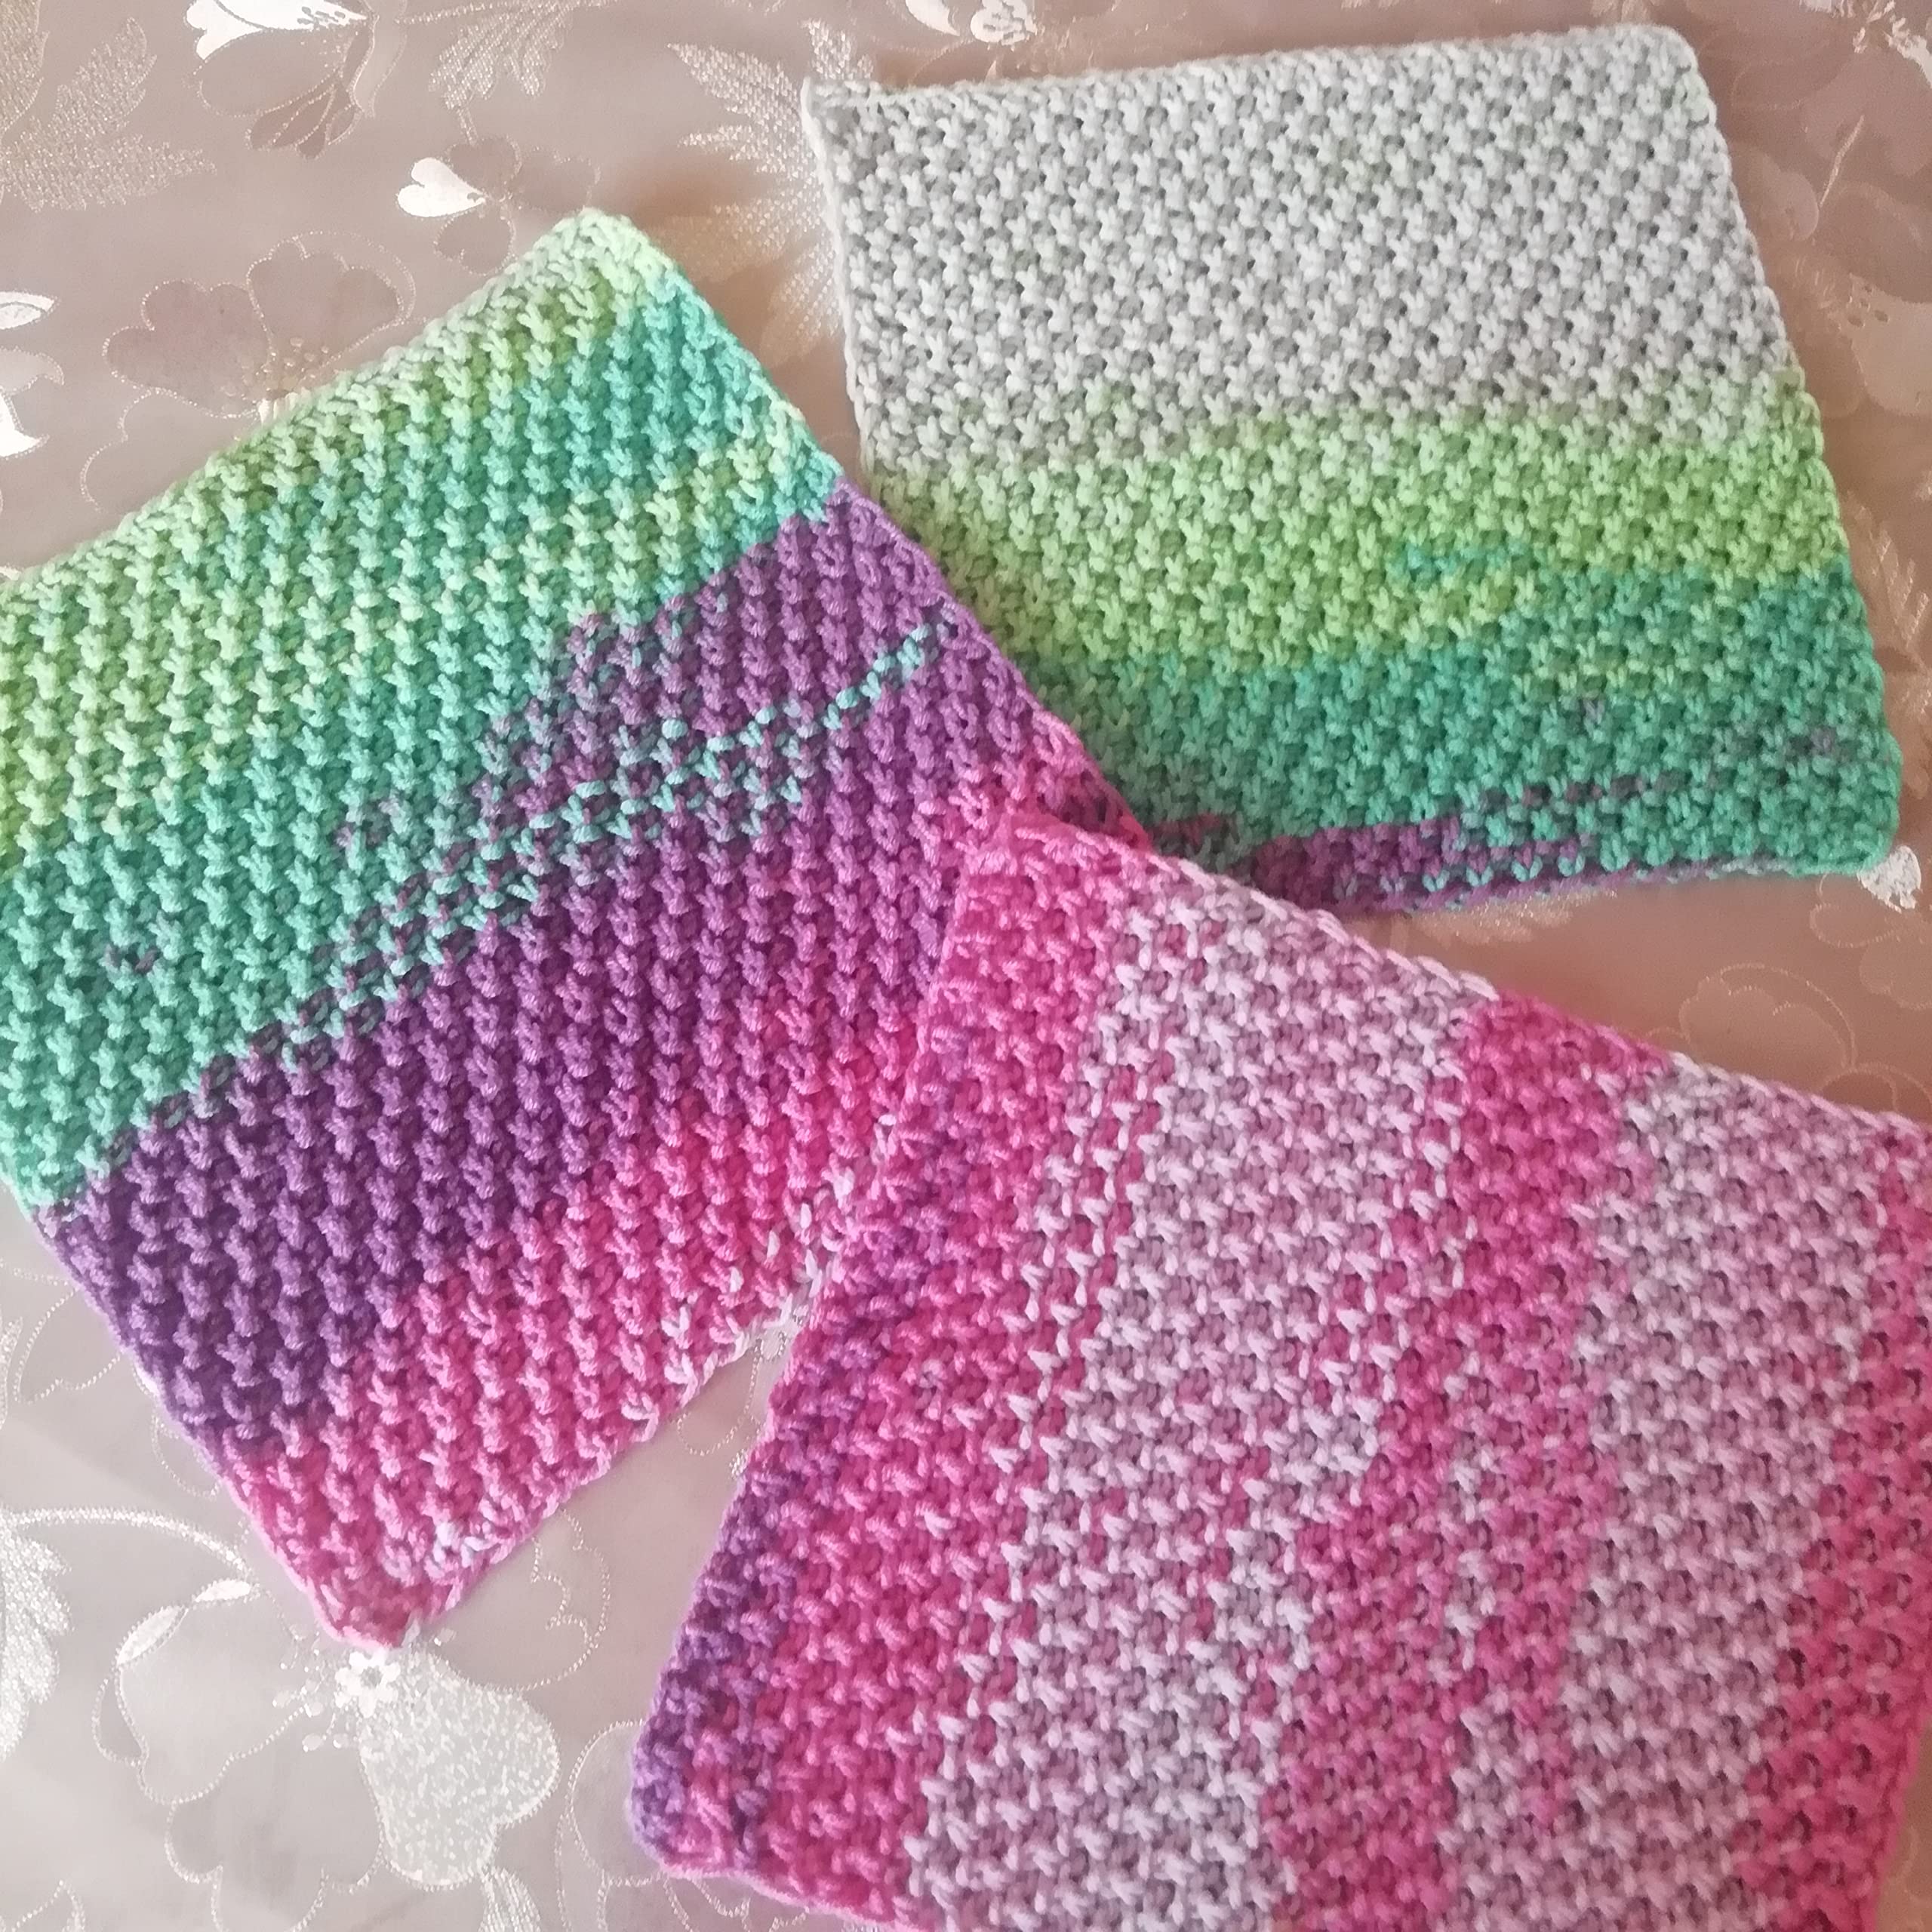 Colorful Set 3 Cotton Washcloths Super Absorbent Reusable Dishcloths Knitwear Square Soft Ecology Rags